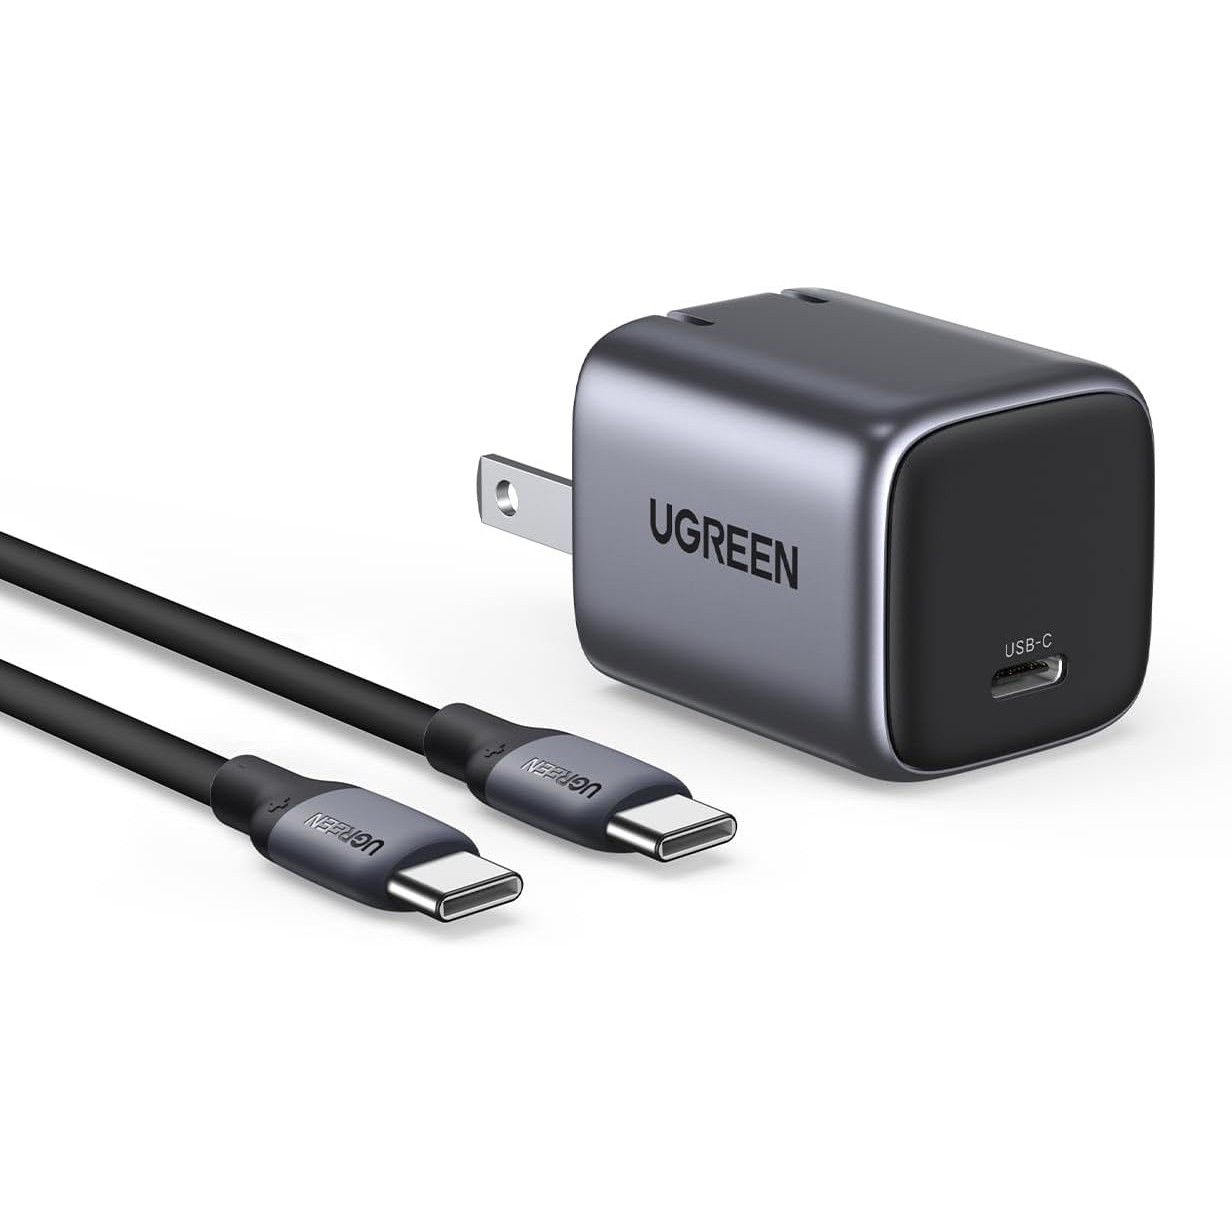 Best USB-C 20W Chargers For iPhone 15 And iPhone 15 Pro - iOS Hacker